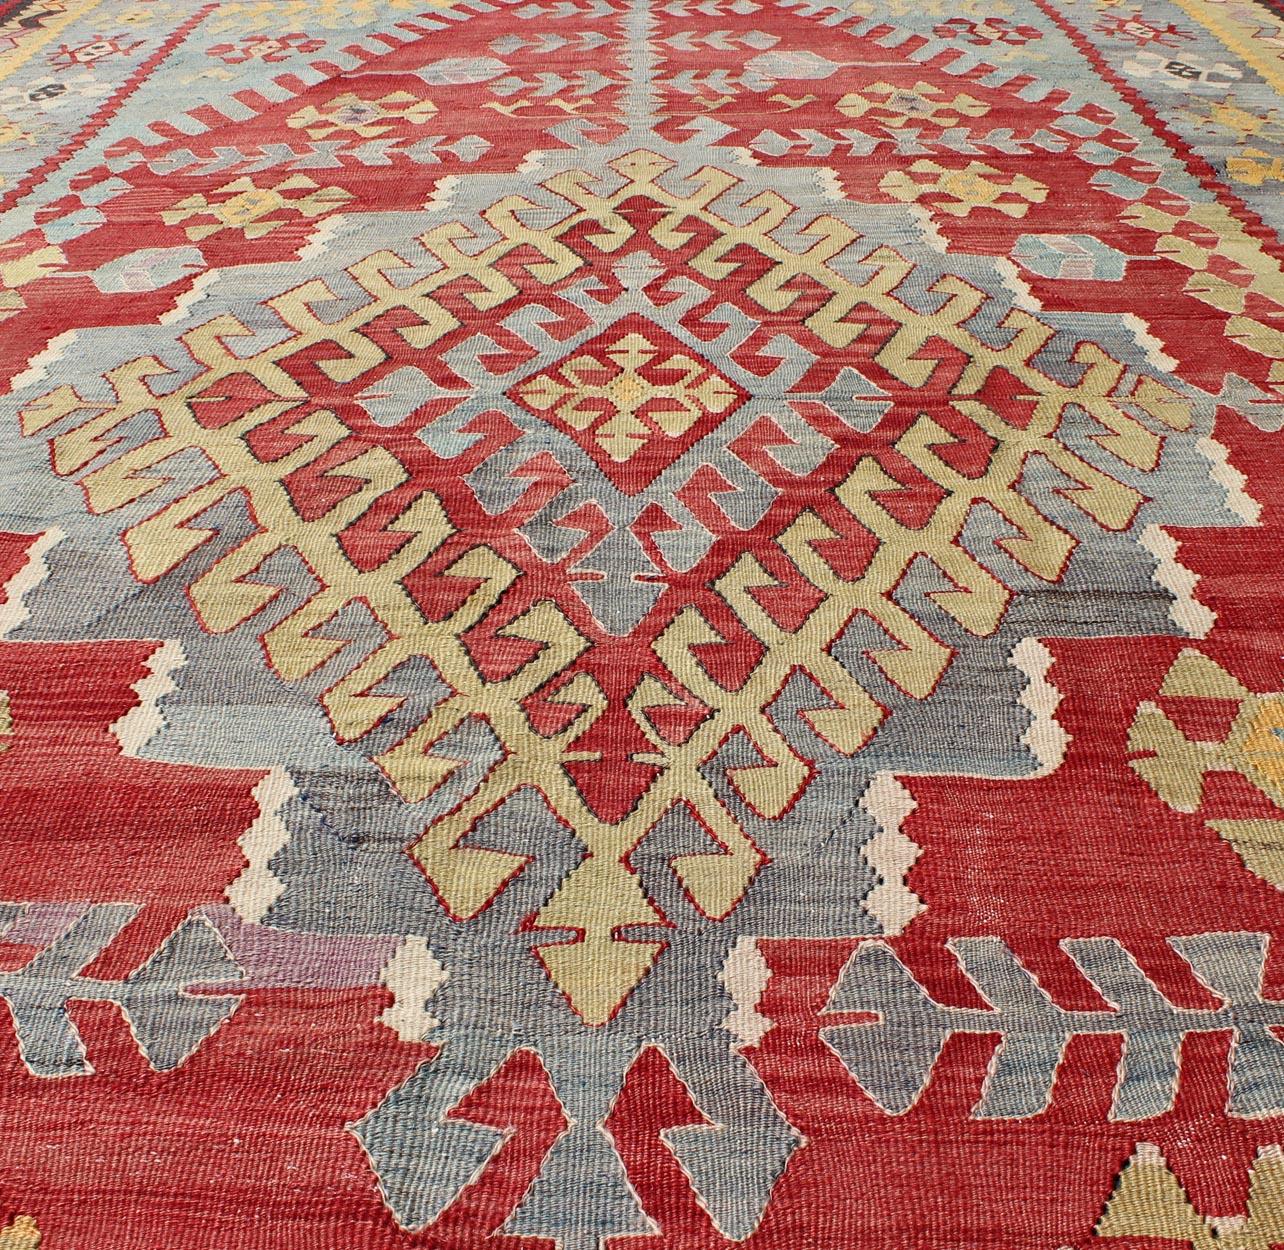 Vintage Turkish Kilim Flat-Weave Rug with Geometric Design in Red, Yellow, Green For Sale 6